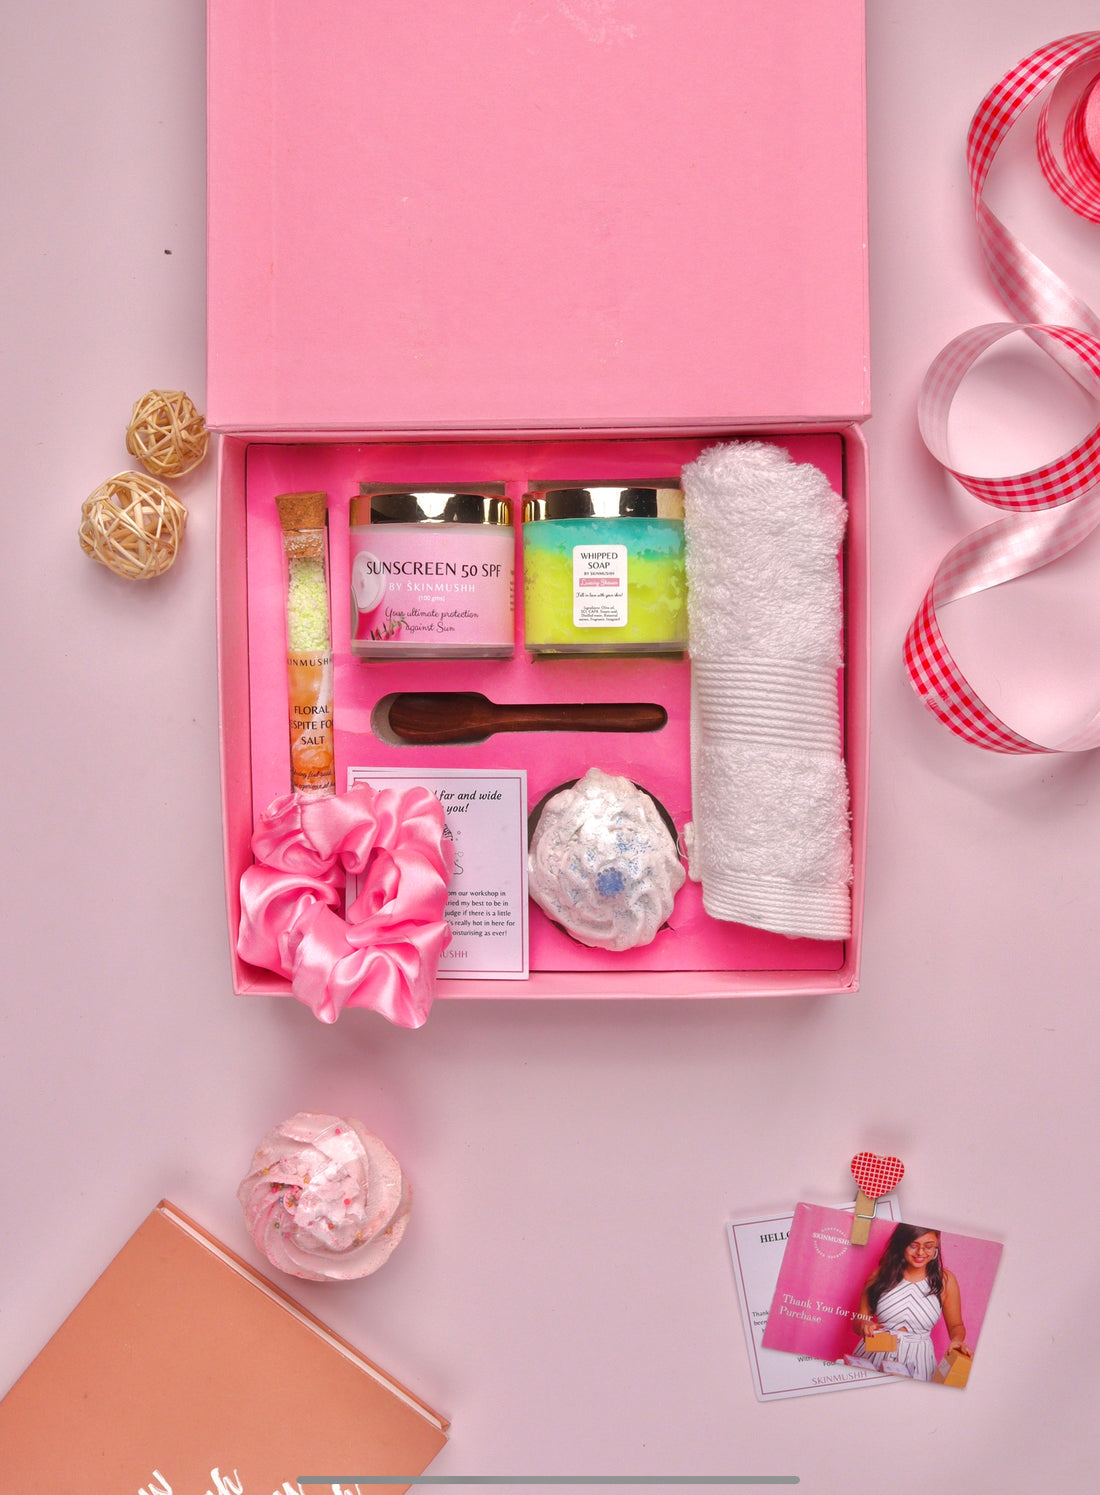 Cosmetic and Spa Hampers Online with Free Shipping from FNP